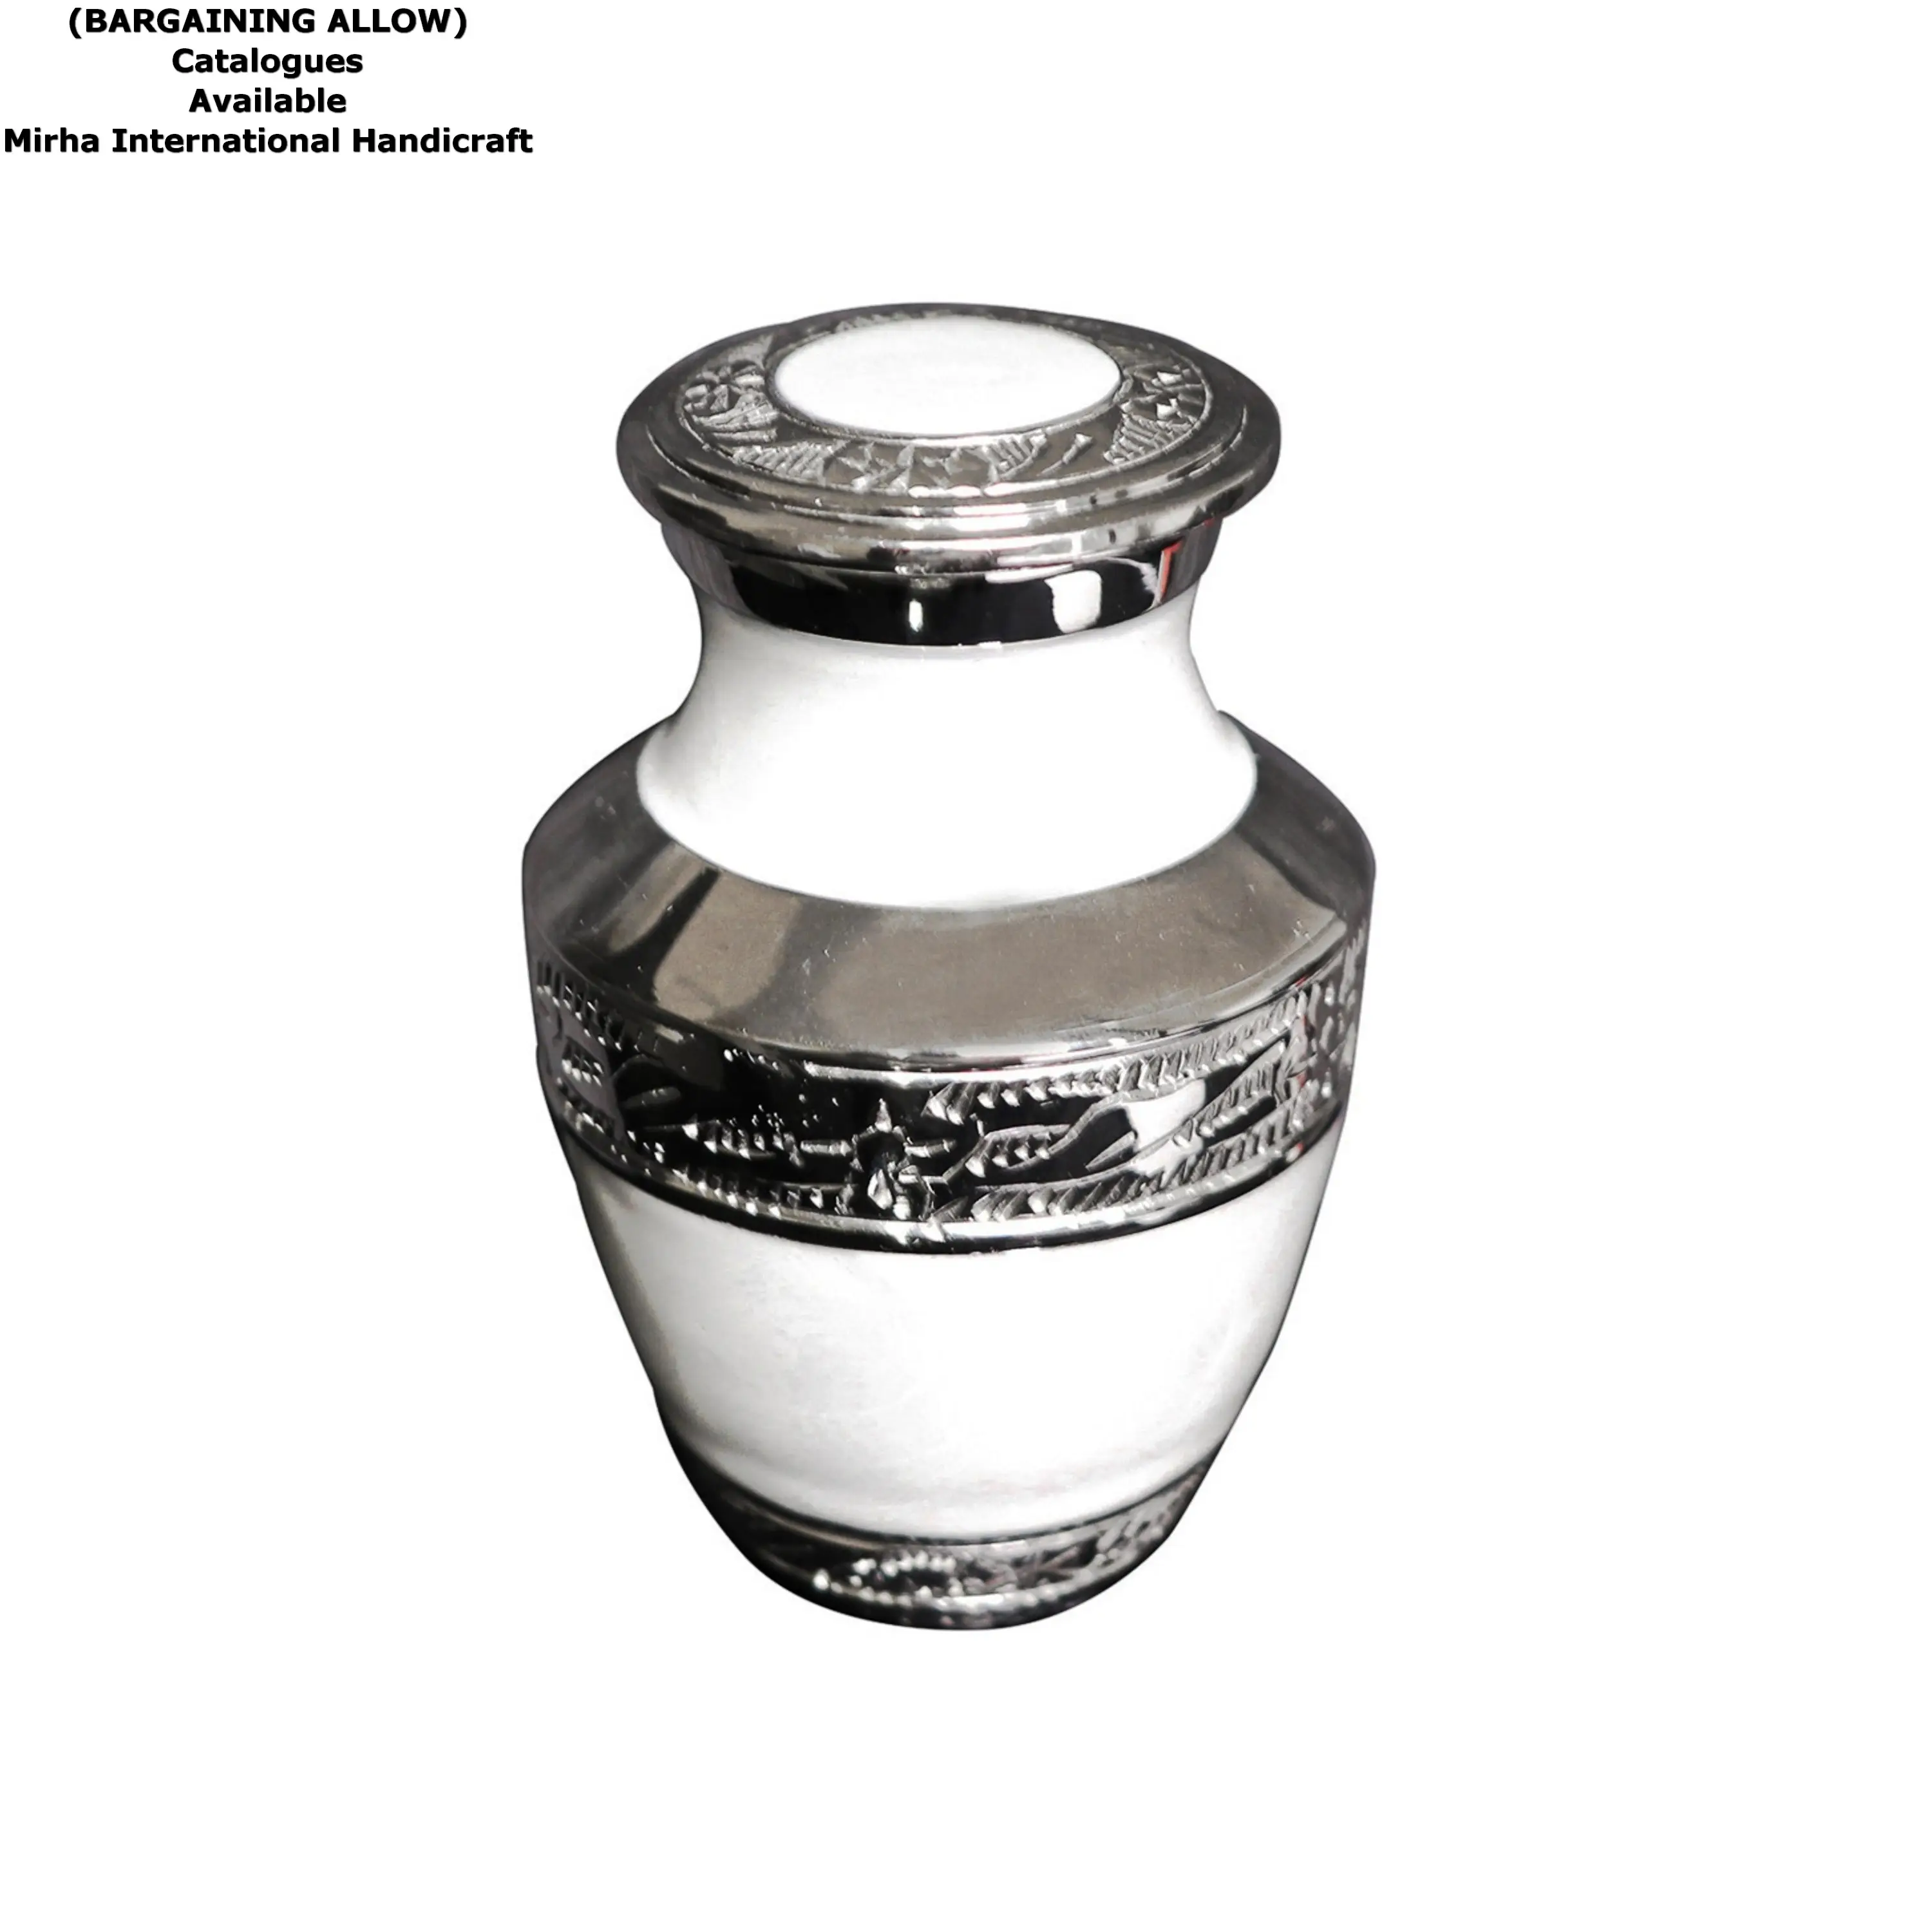 Pearl White Keepsake Cremation Urn for Ashes High Quality Human Ashes Urns for Women and Man